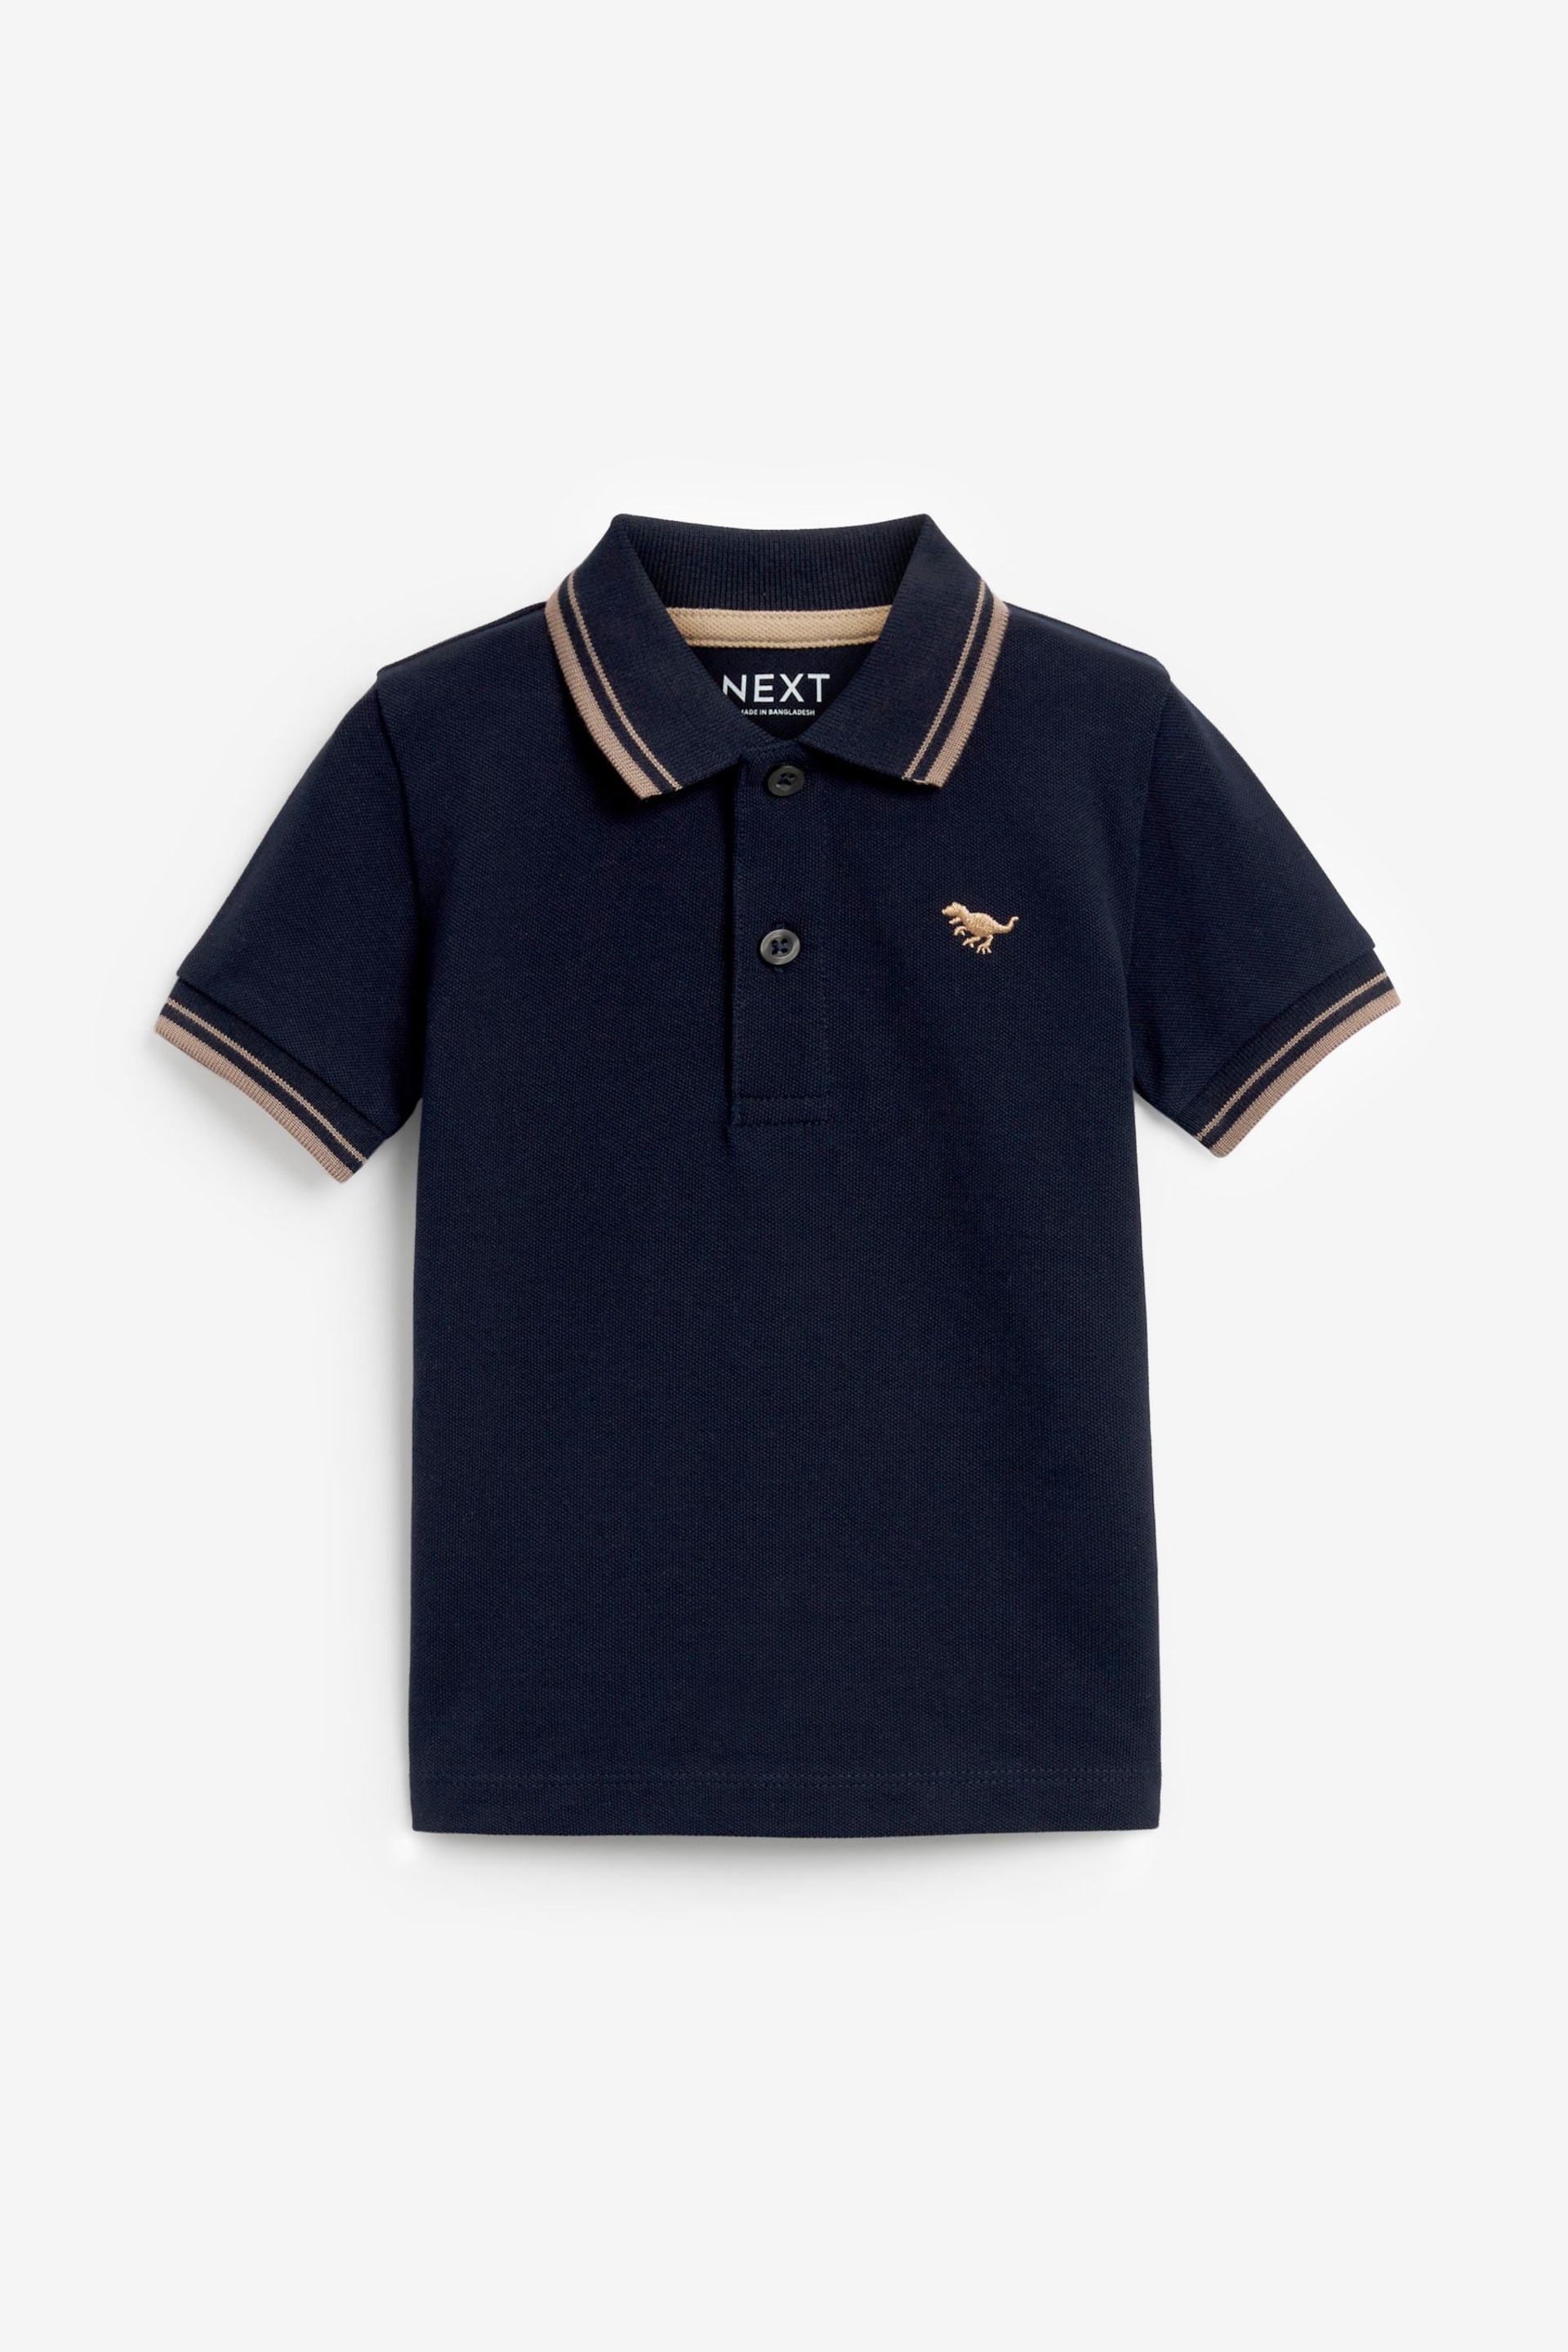 Navy Tipped Short Sleeve Polo Shirt (3mths-7yrs) - Image 1 of 4